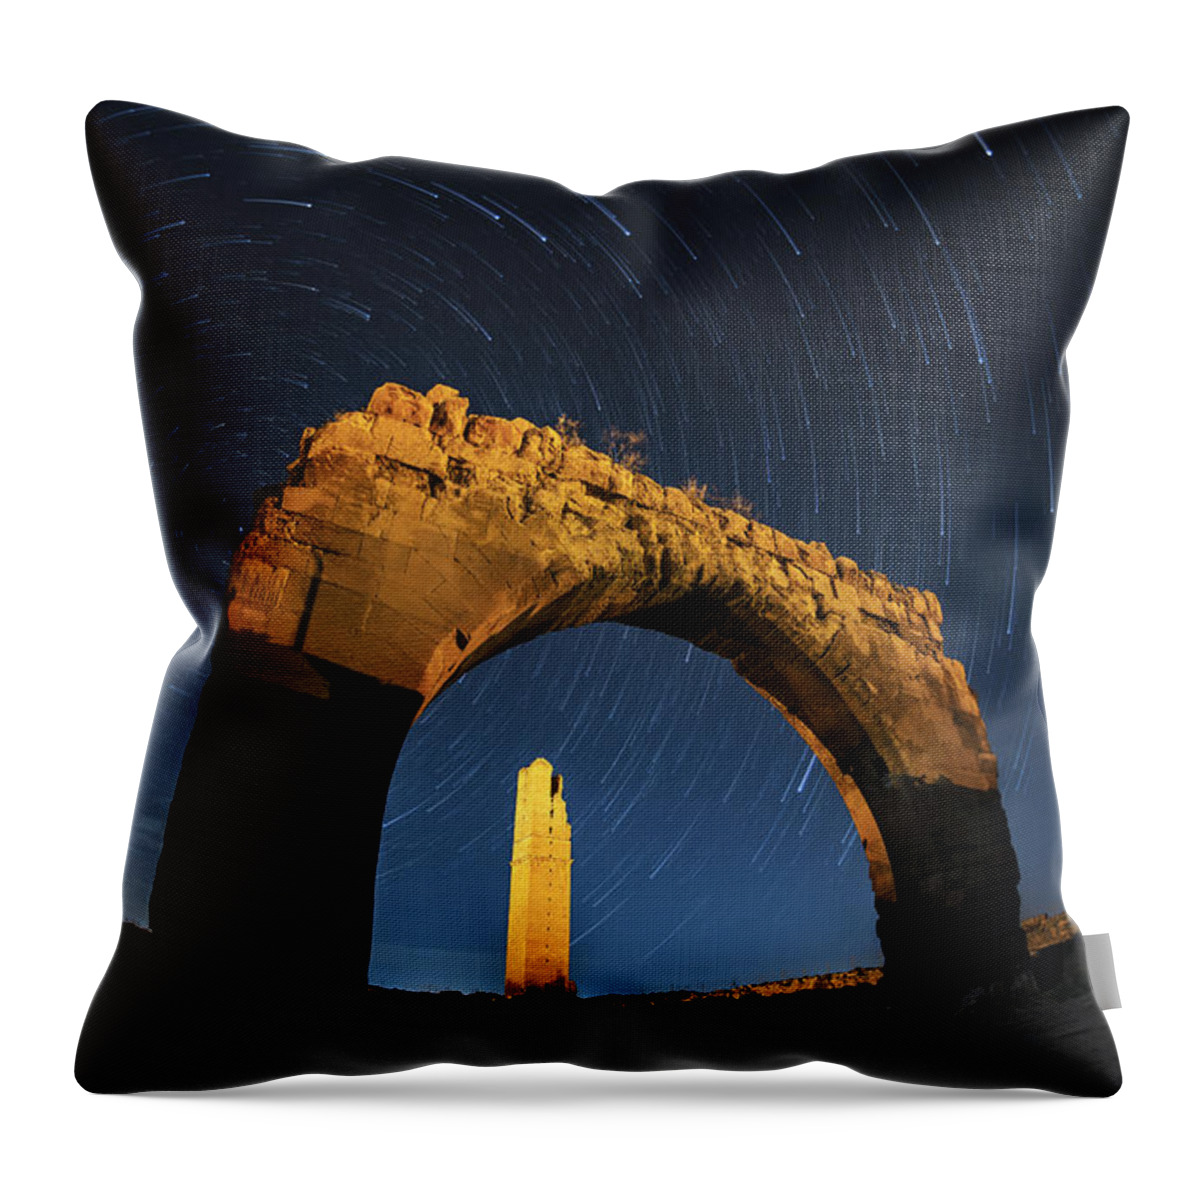 Arch Throw Pillow featuring the photograph Arch Of Harran by Www.tonnaja.com